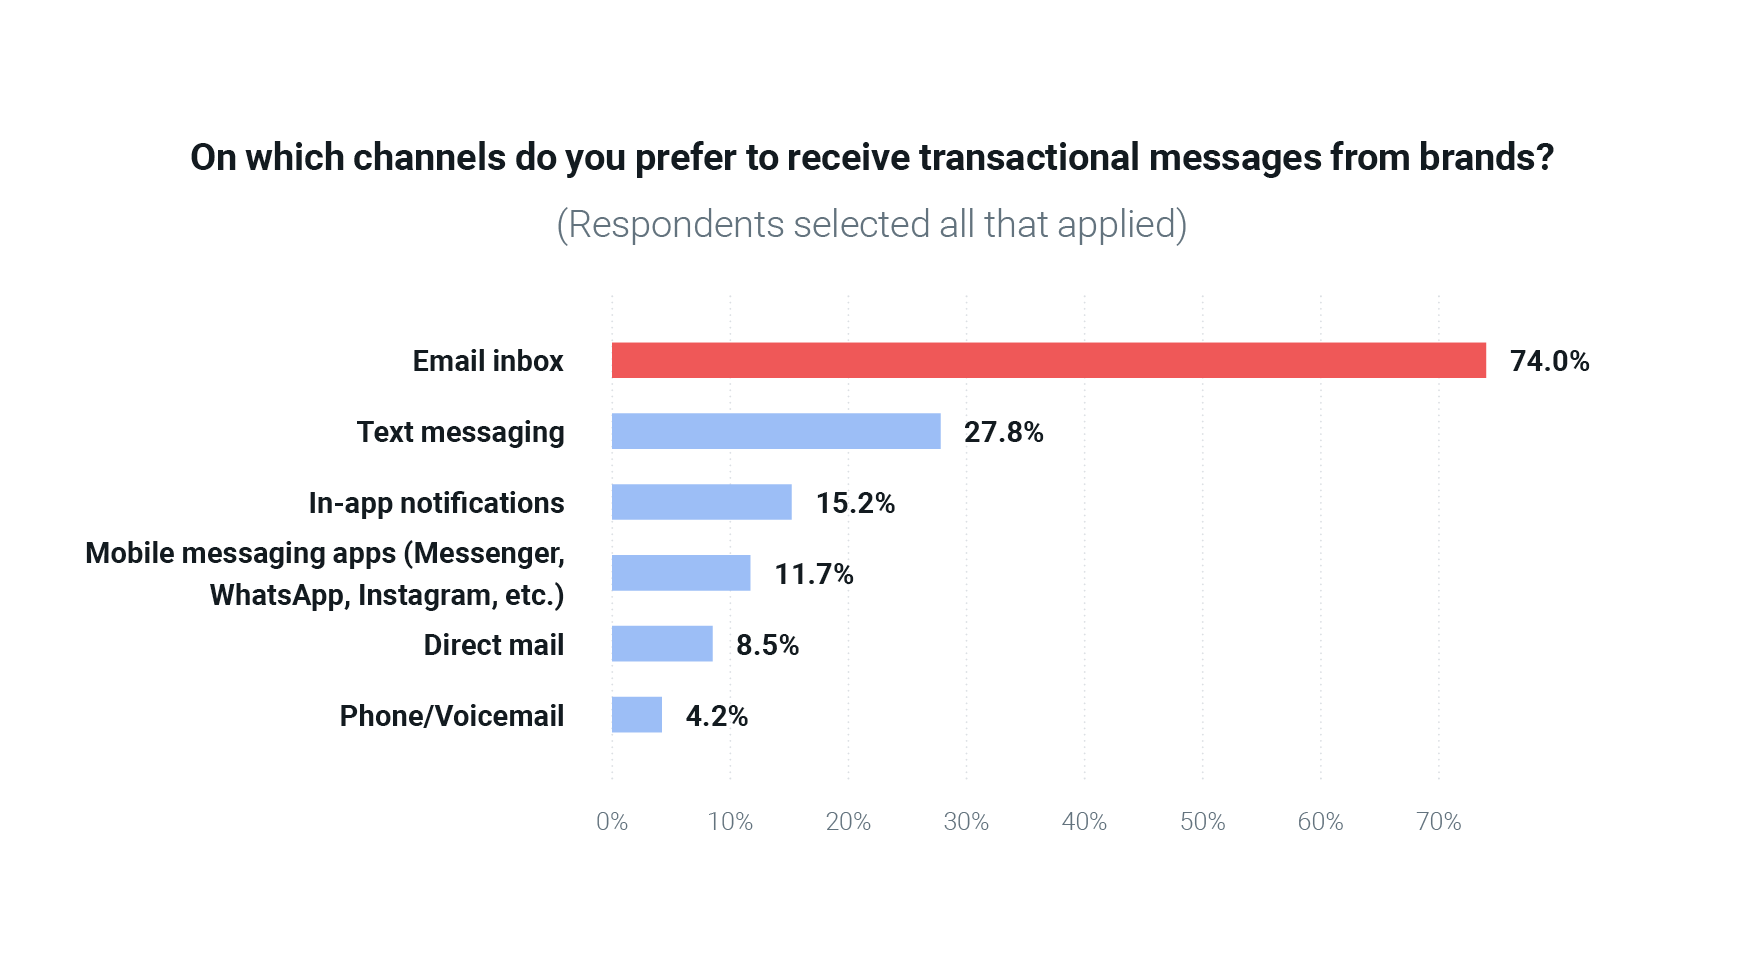 Chart on transactional message channel preferences